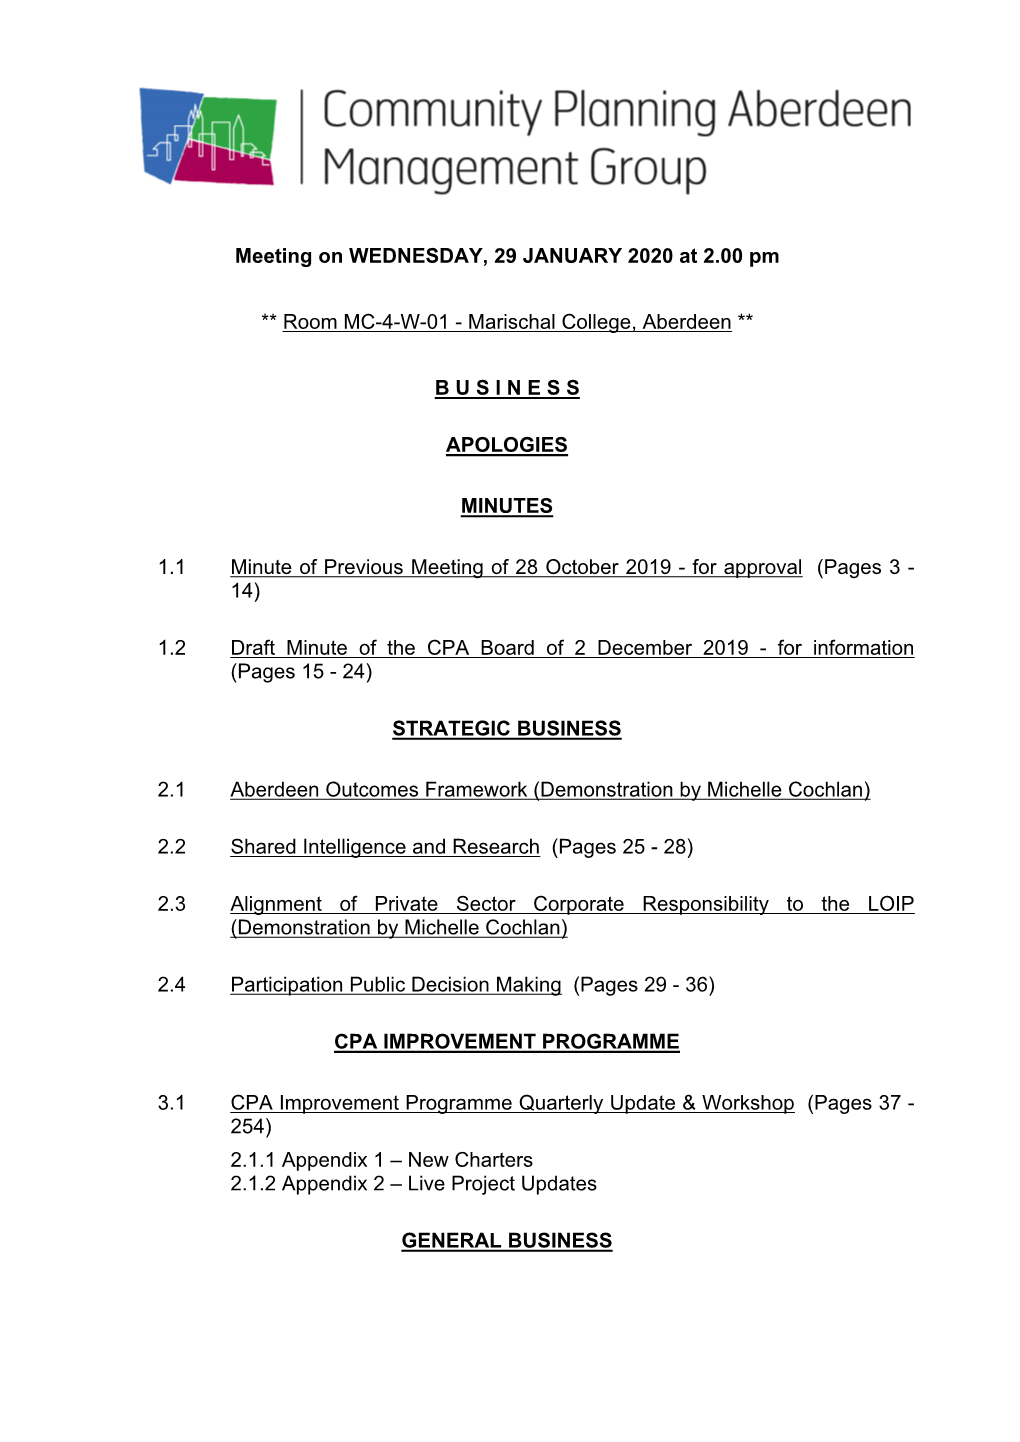 (Private Pack)Agenda Document for Community Planning Aberdeen Management Group, 29/01/2020 14:00